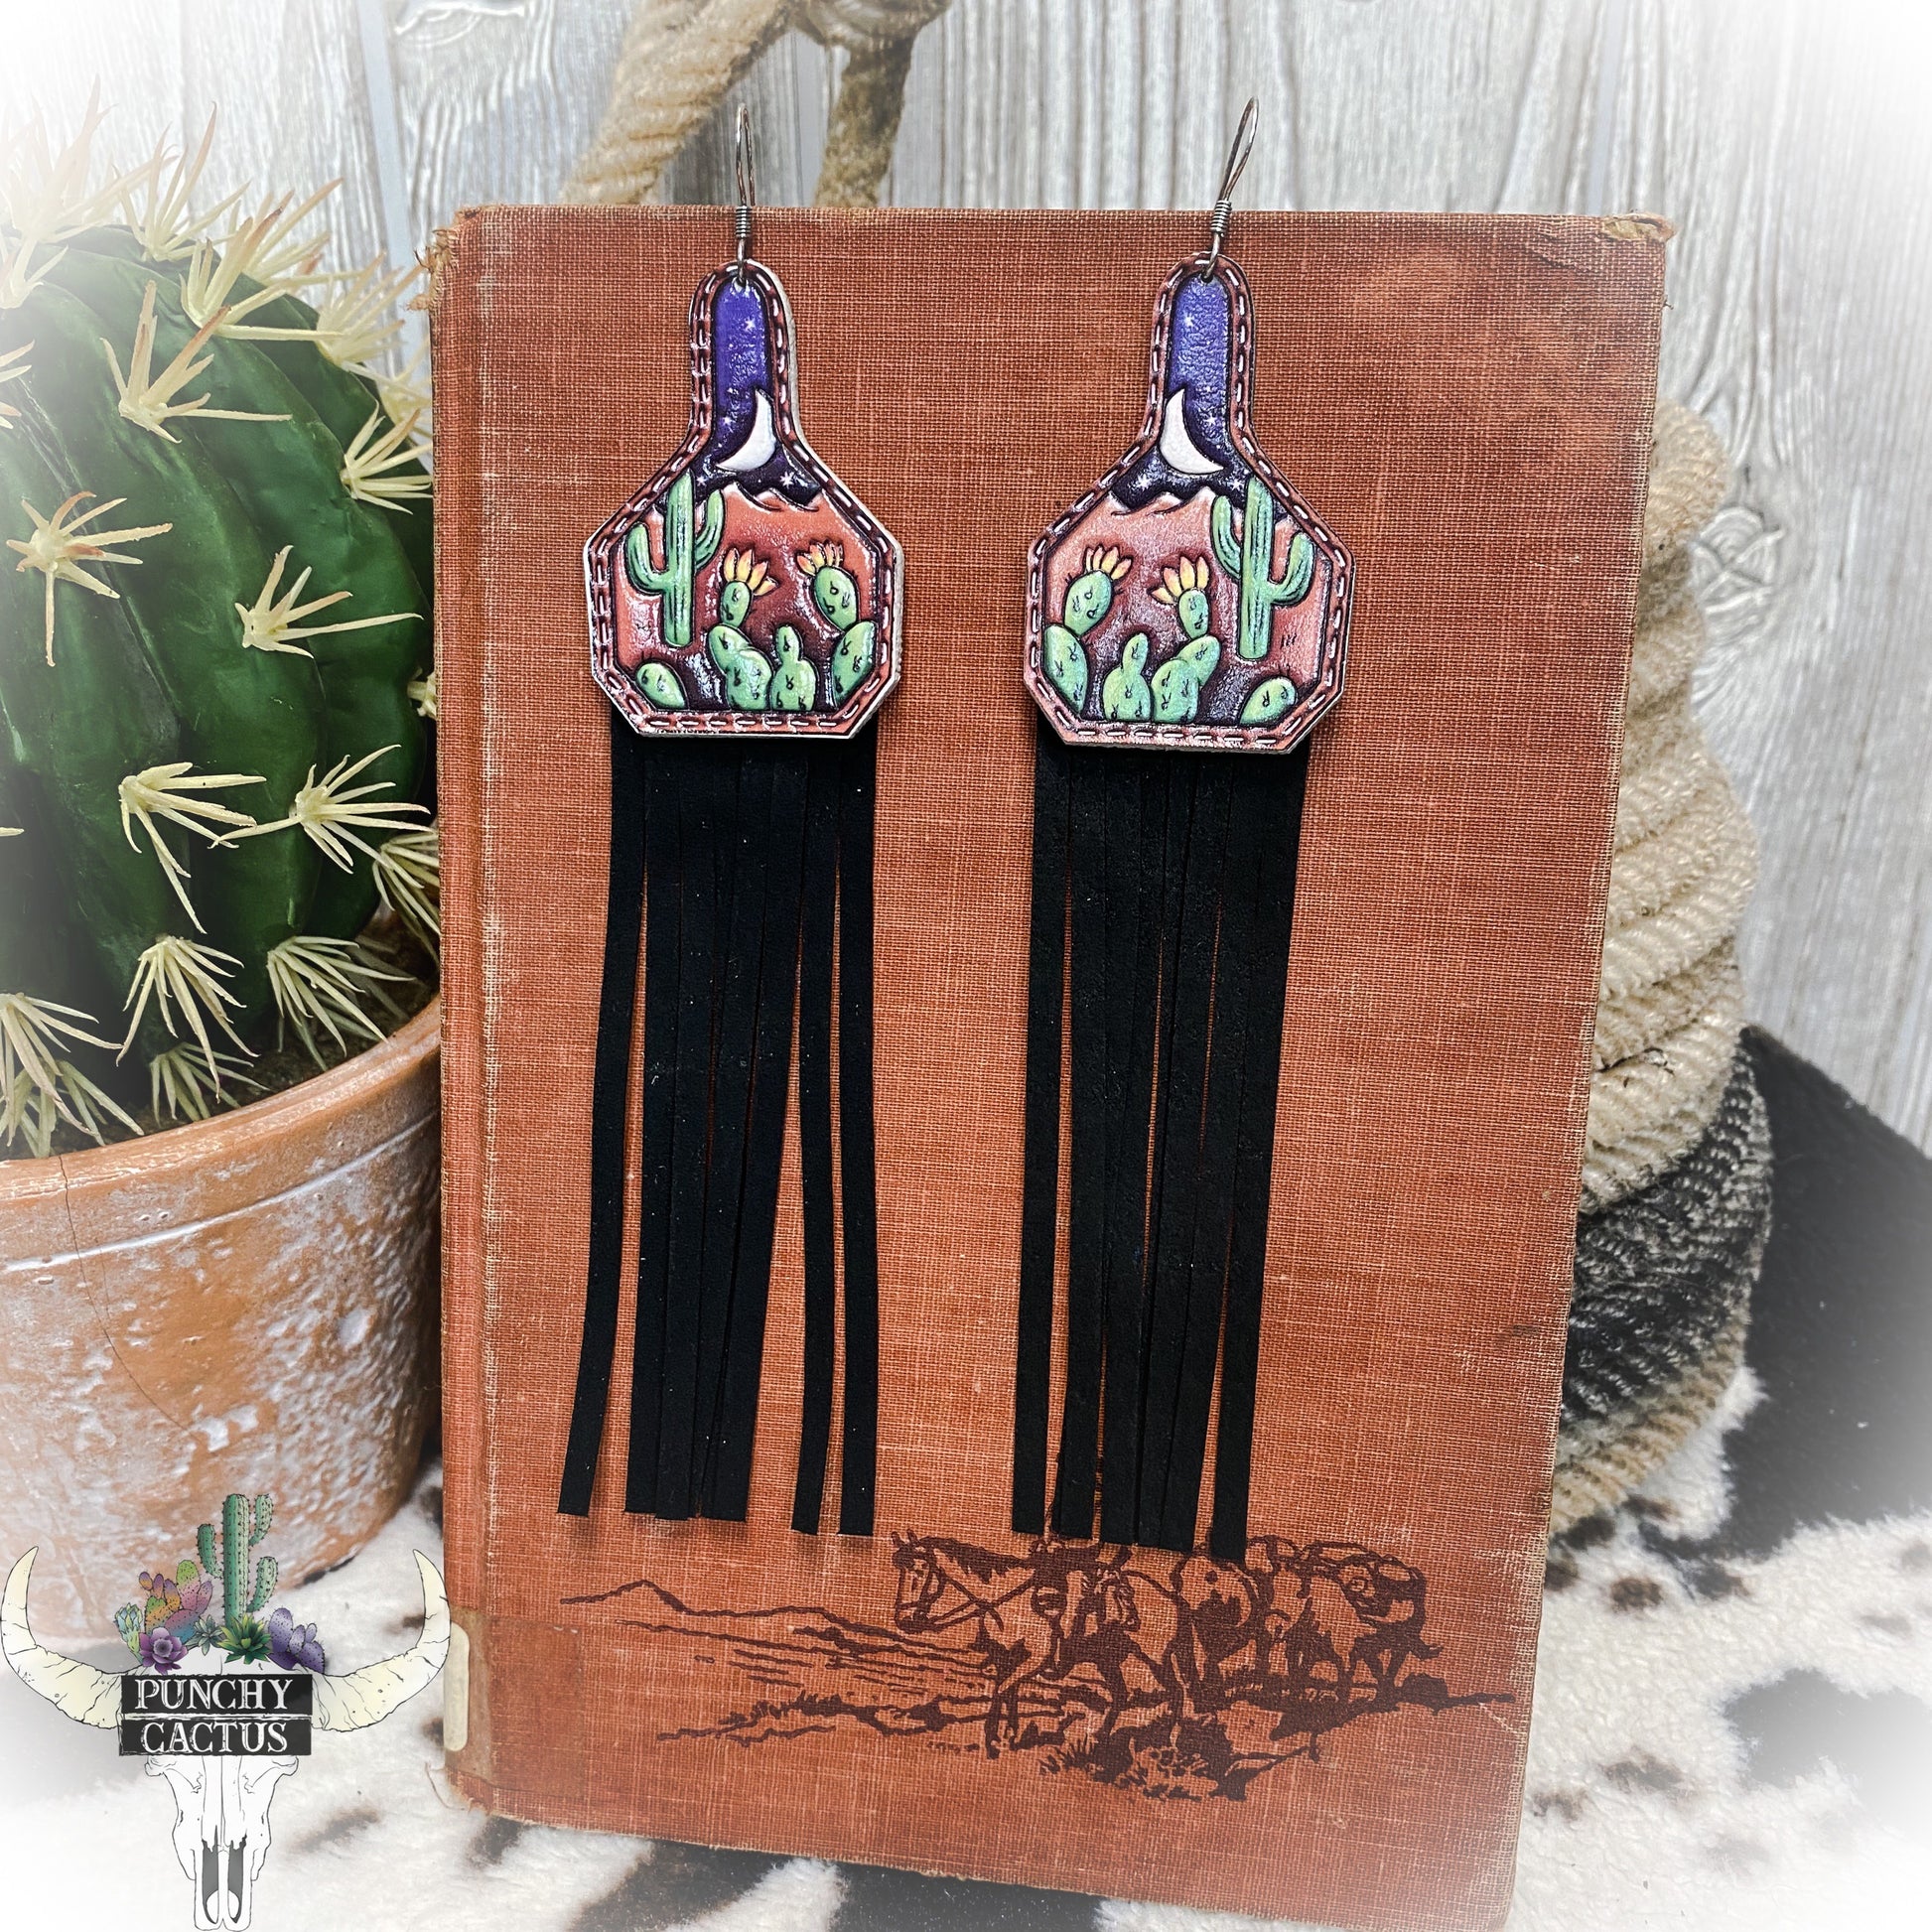 western leather cow tag earrings with cactus tooled design and black leather fringe